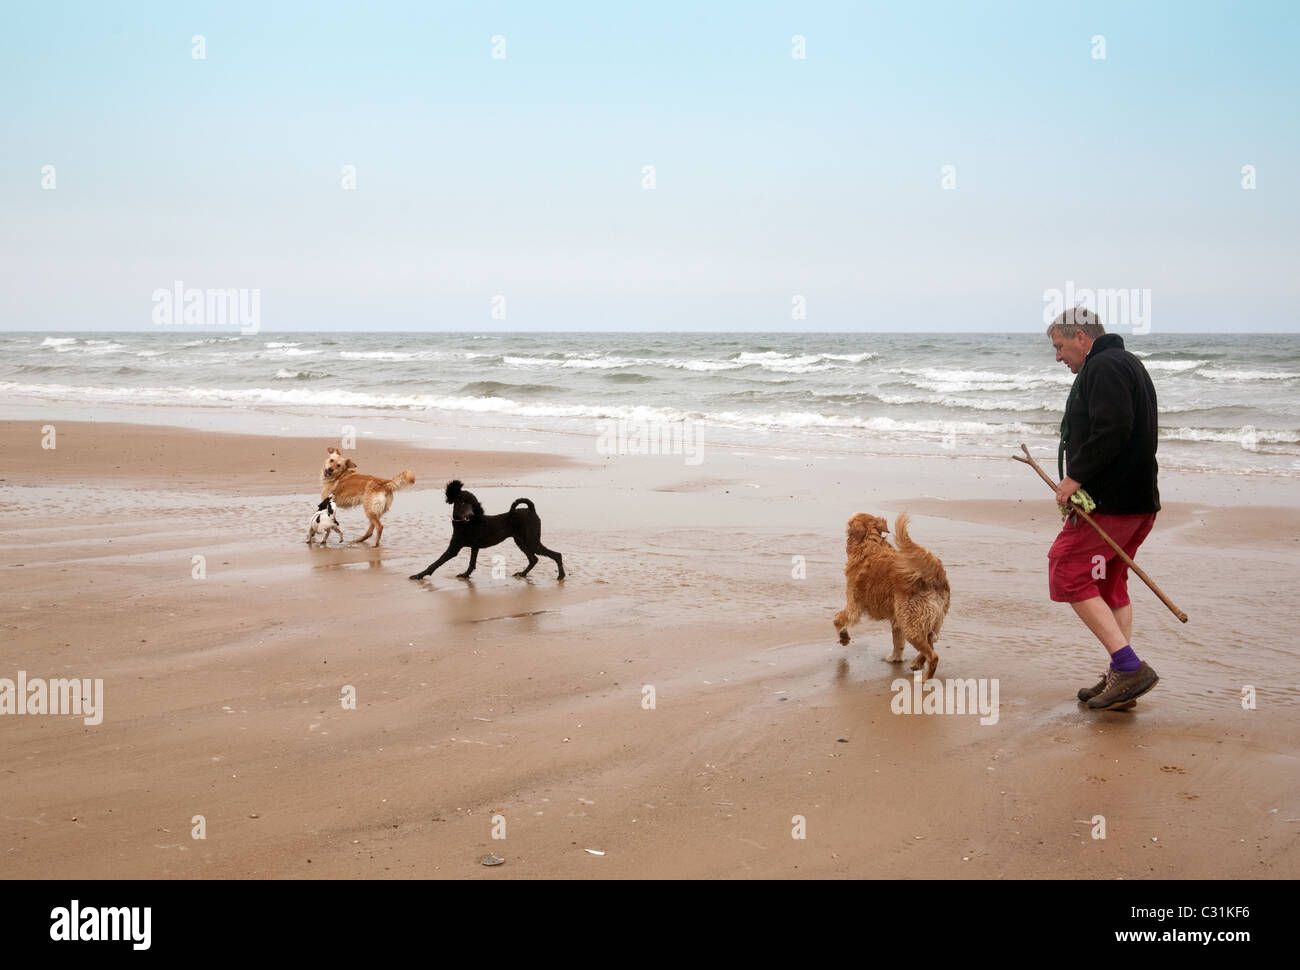 A man walking his dogs by the waters edge, Holkham beach, North Norfolk coast, UK Stock Photo